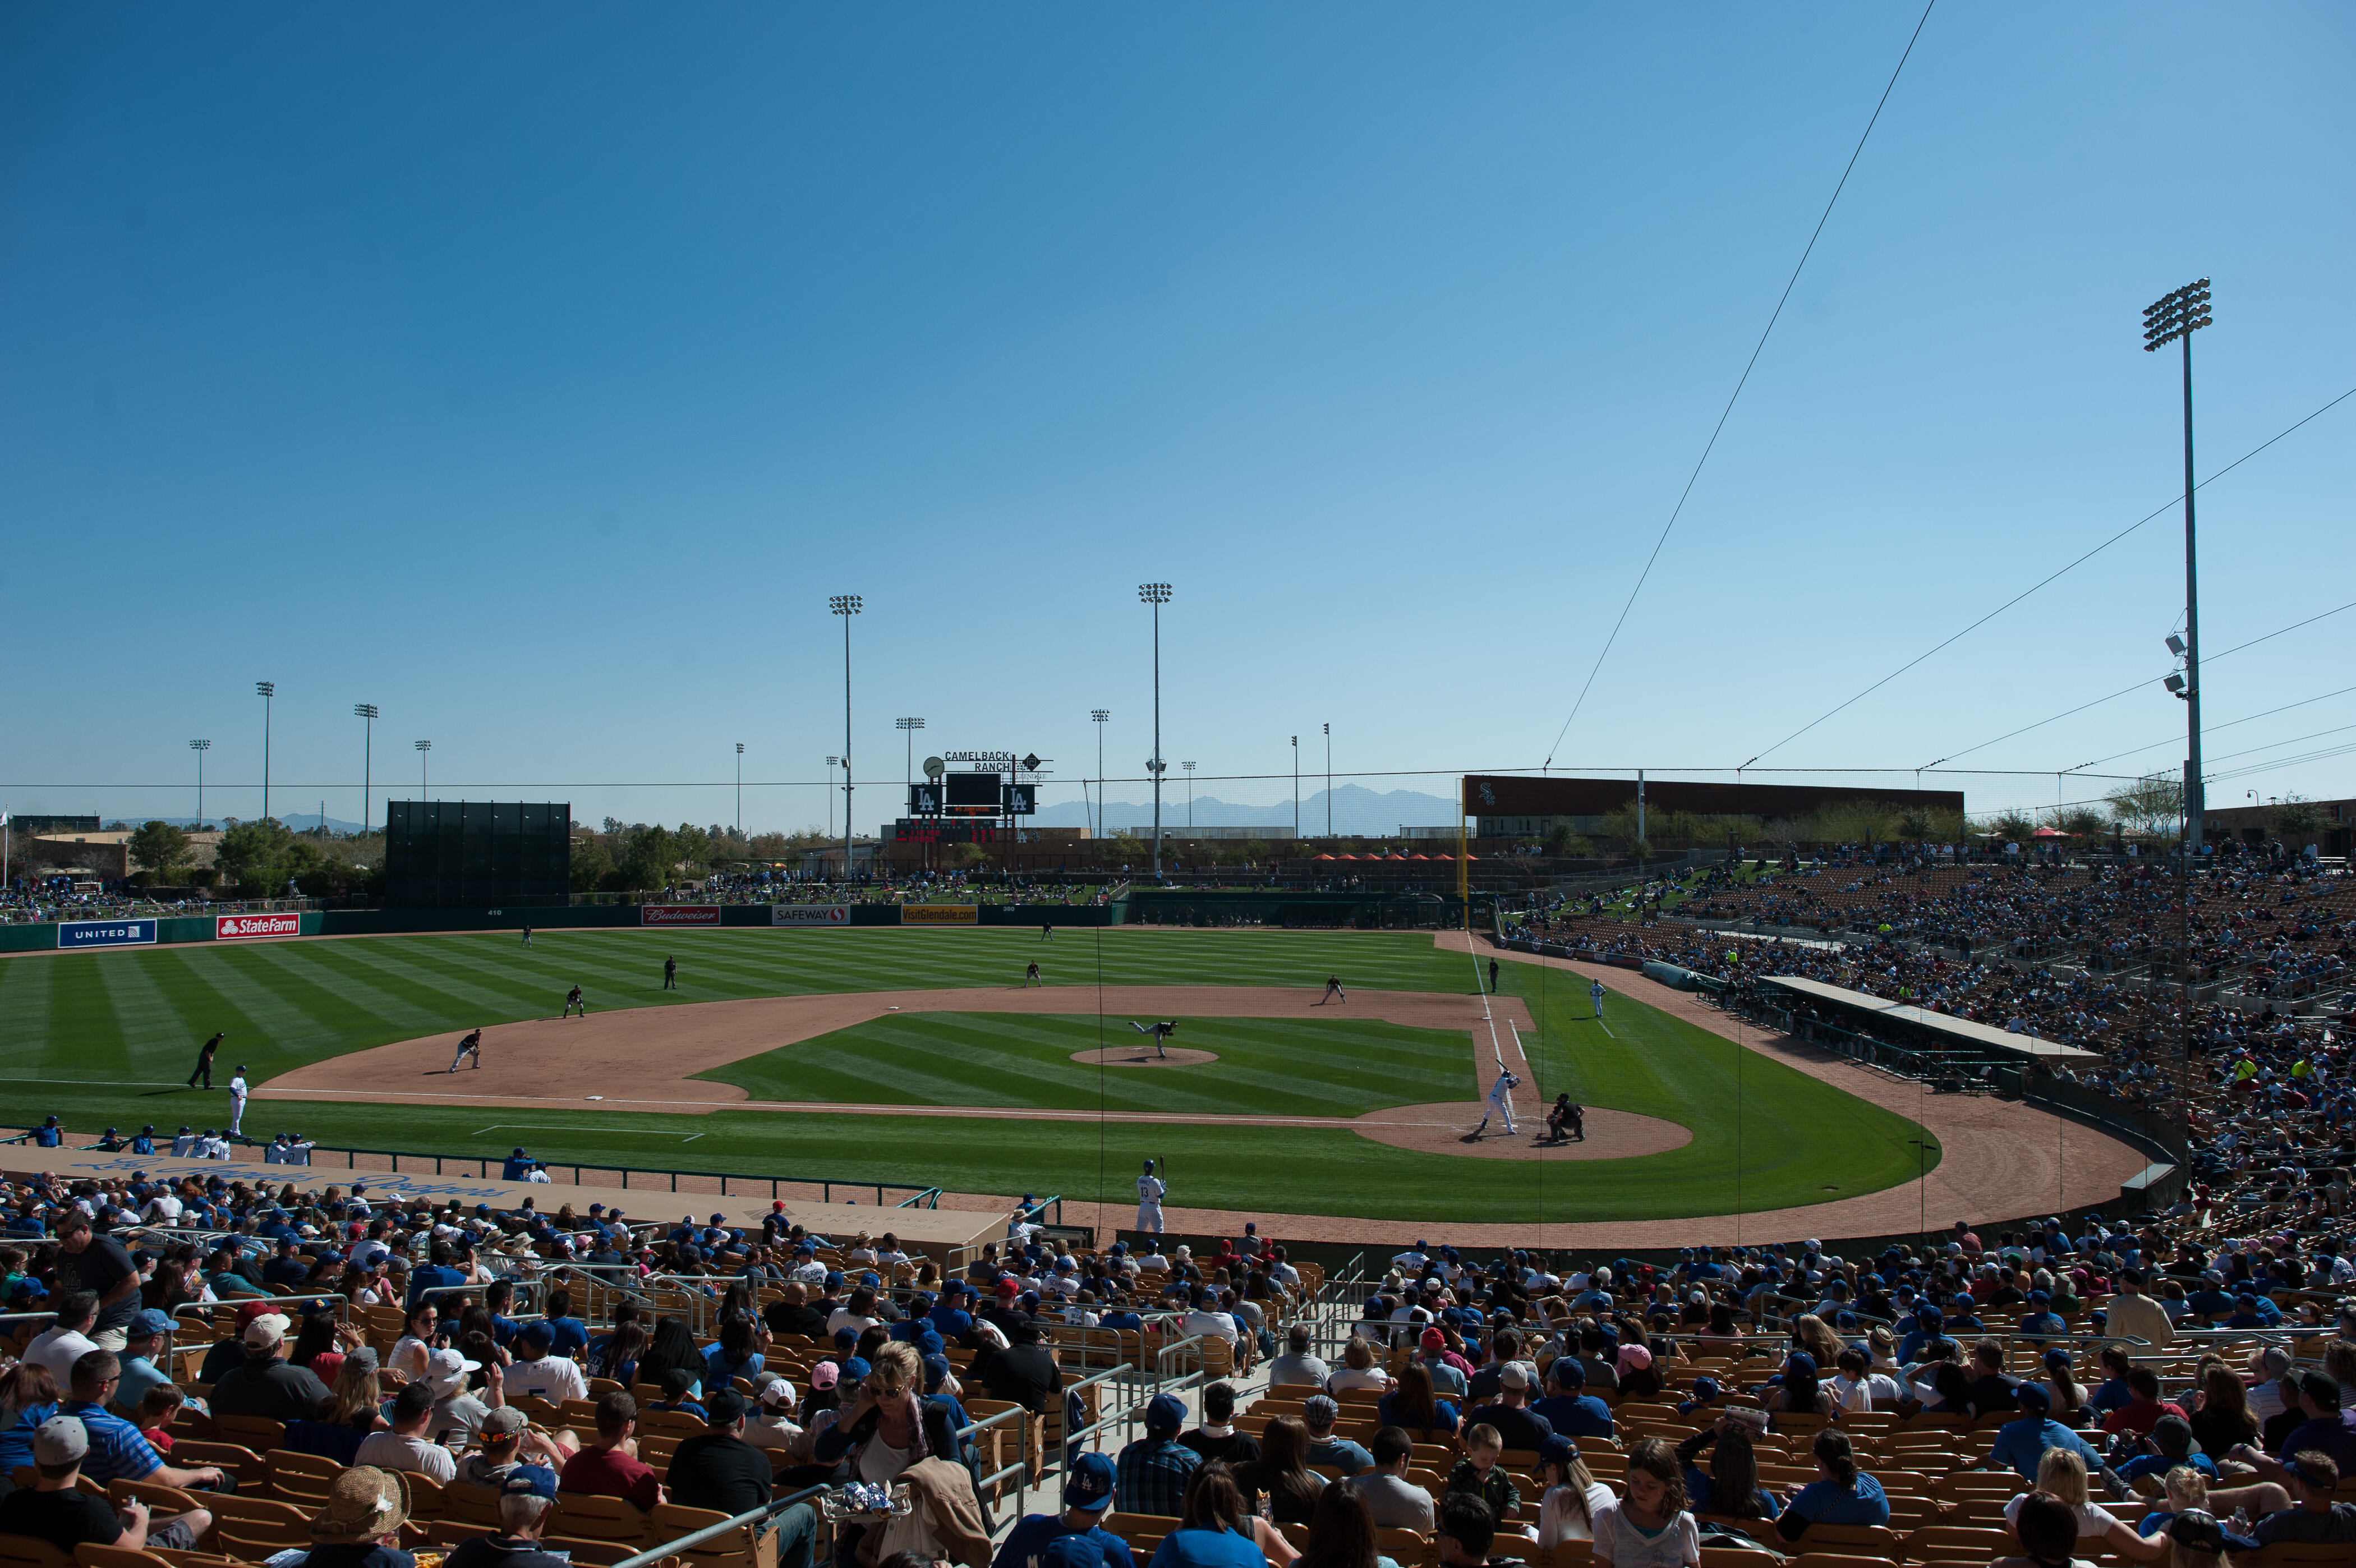 GLENDALE, AZ - FEBRUARY 23: A general view of Camelback Ranch Field during a spring training game between the Los Angeles Dodgers and the Chicago White Sox at Camelback Ranch on February 23, 2013 in Glendale, Arizona. (Photo by Rob Tringali/Getty Images)